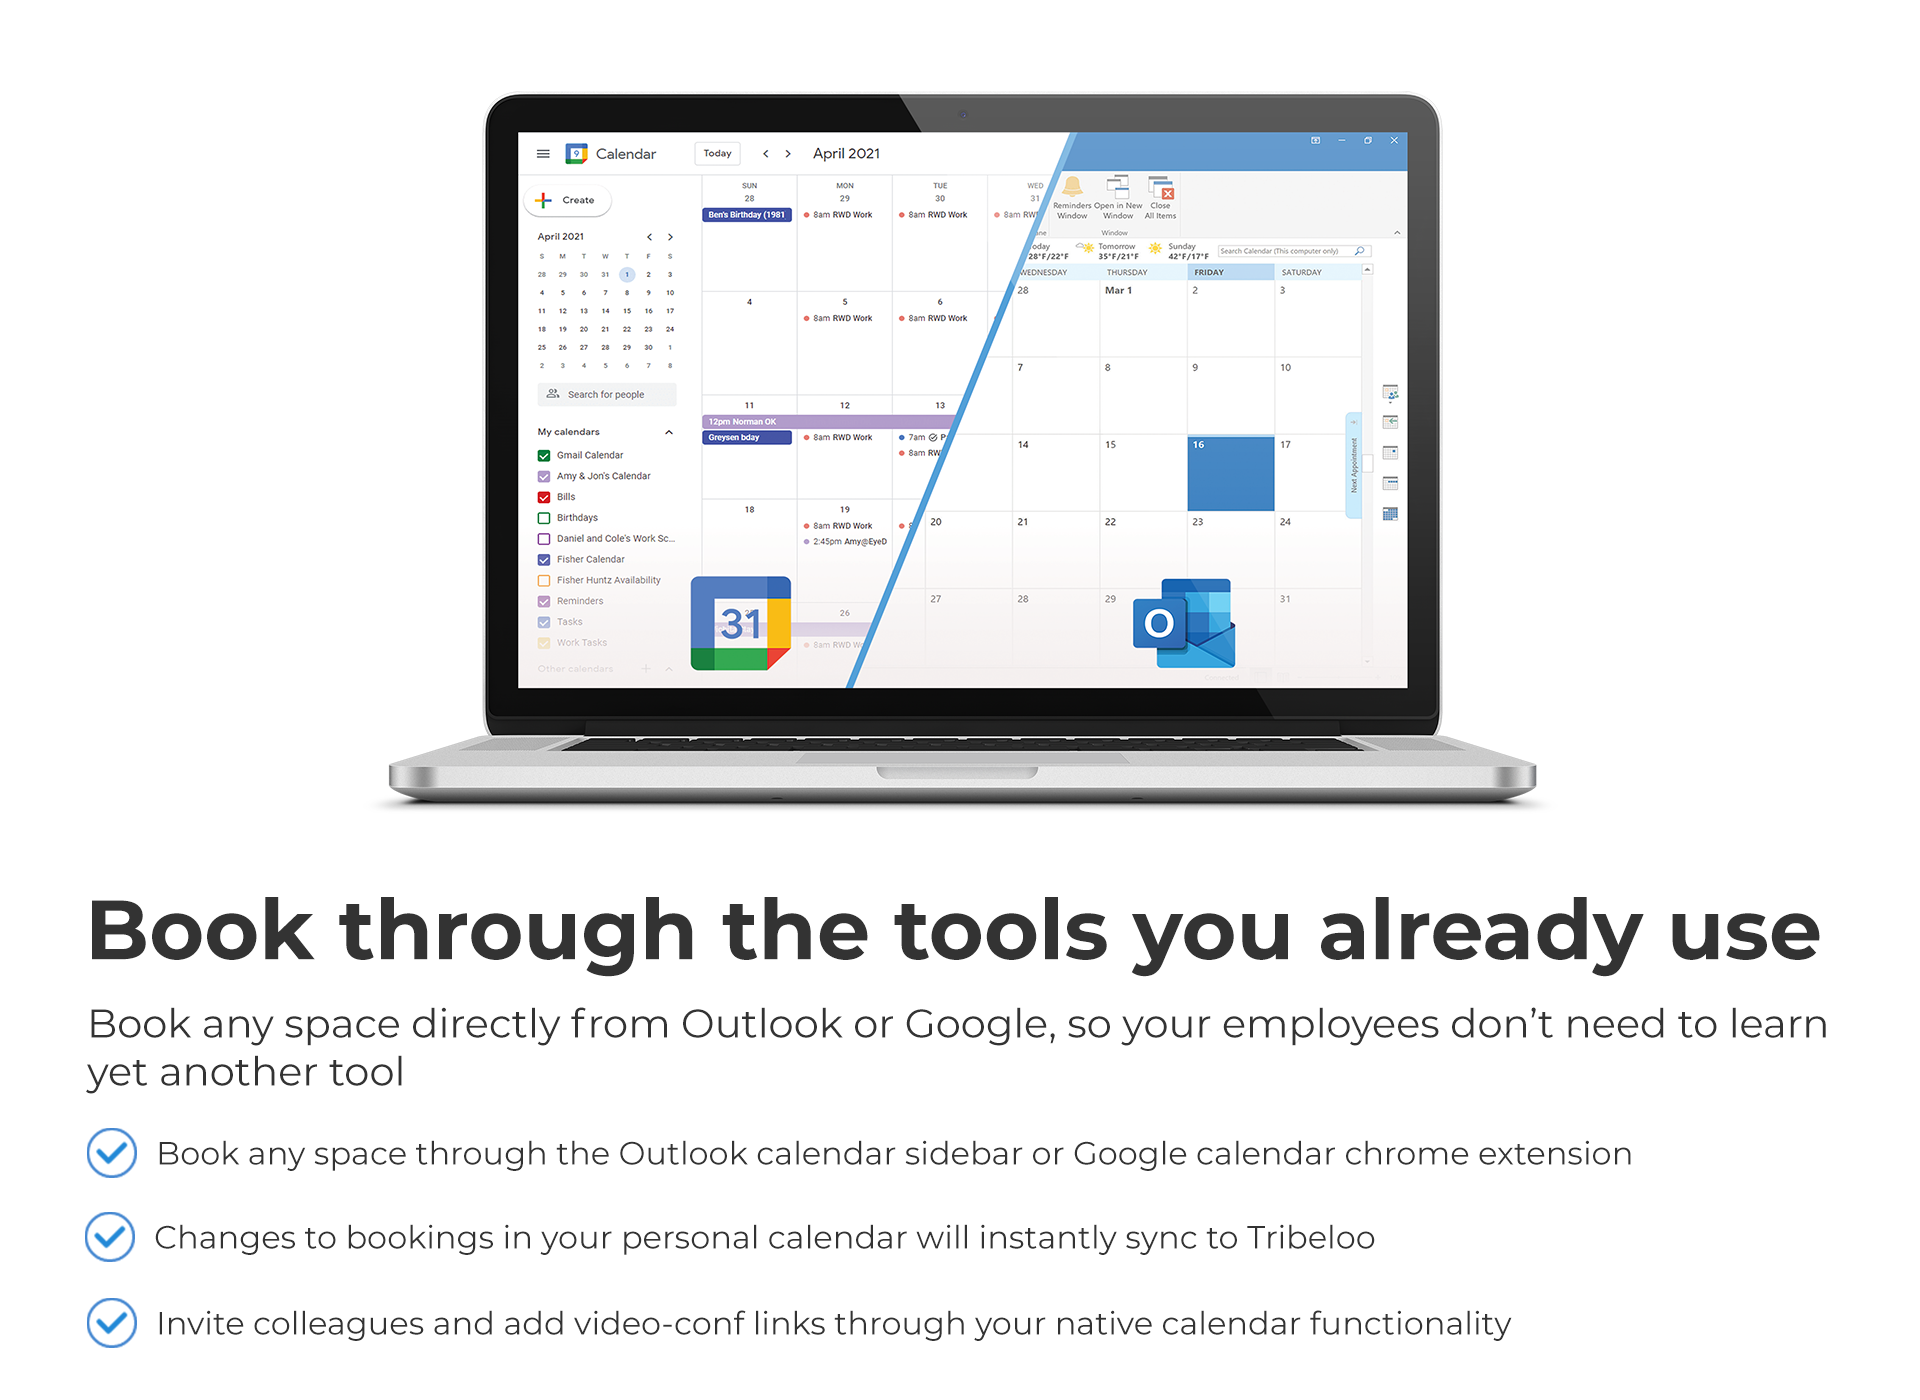 Tribeloo Software - Book from your Outlook or Google calendar